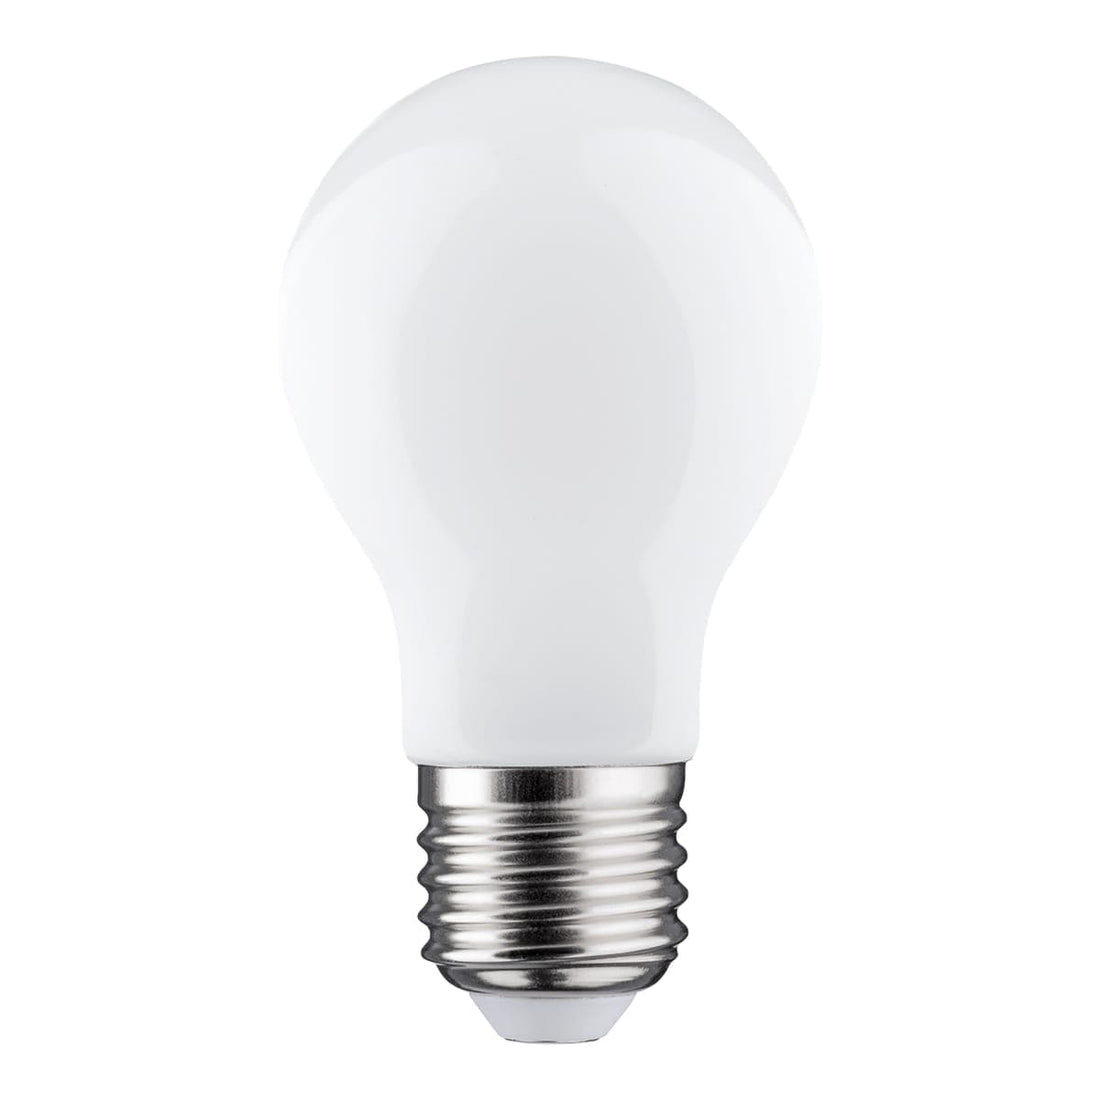 LED BULB E27=100W DROP FROSTED WARM LIGHT